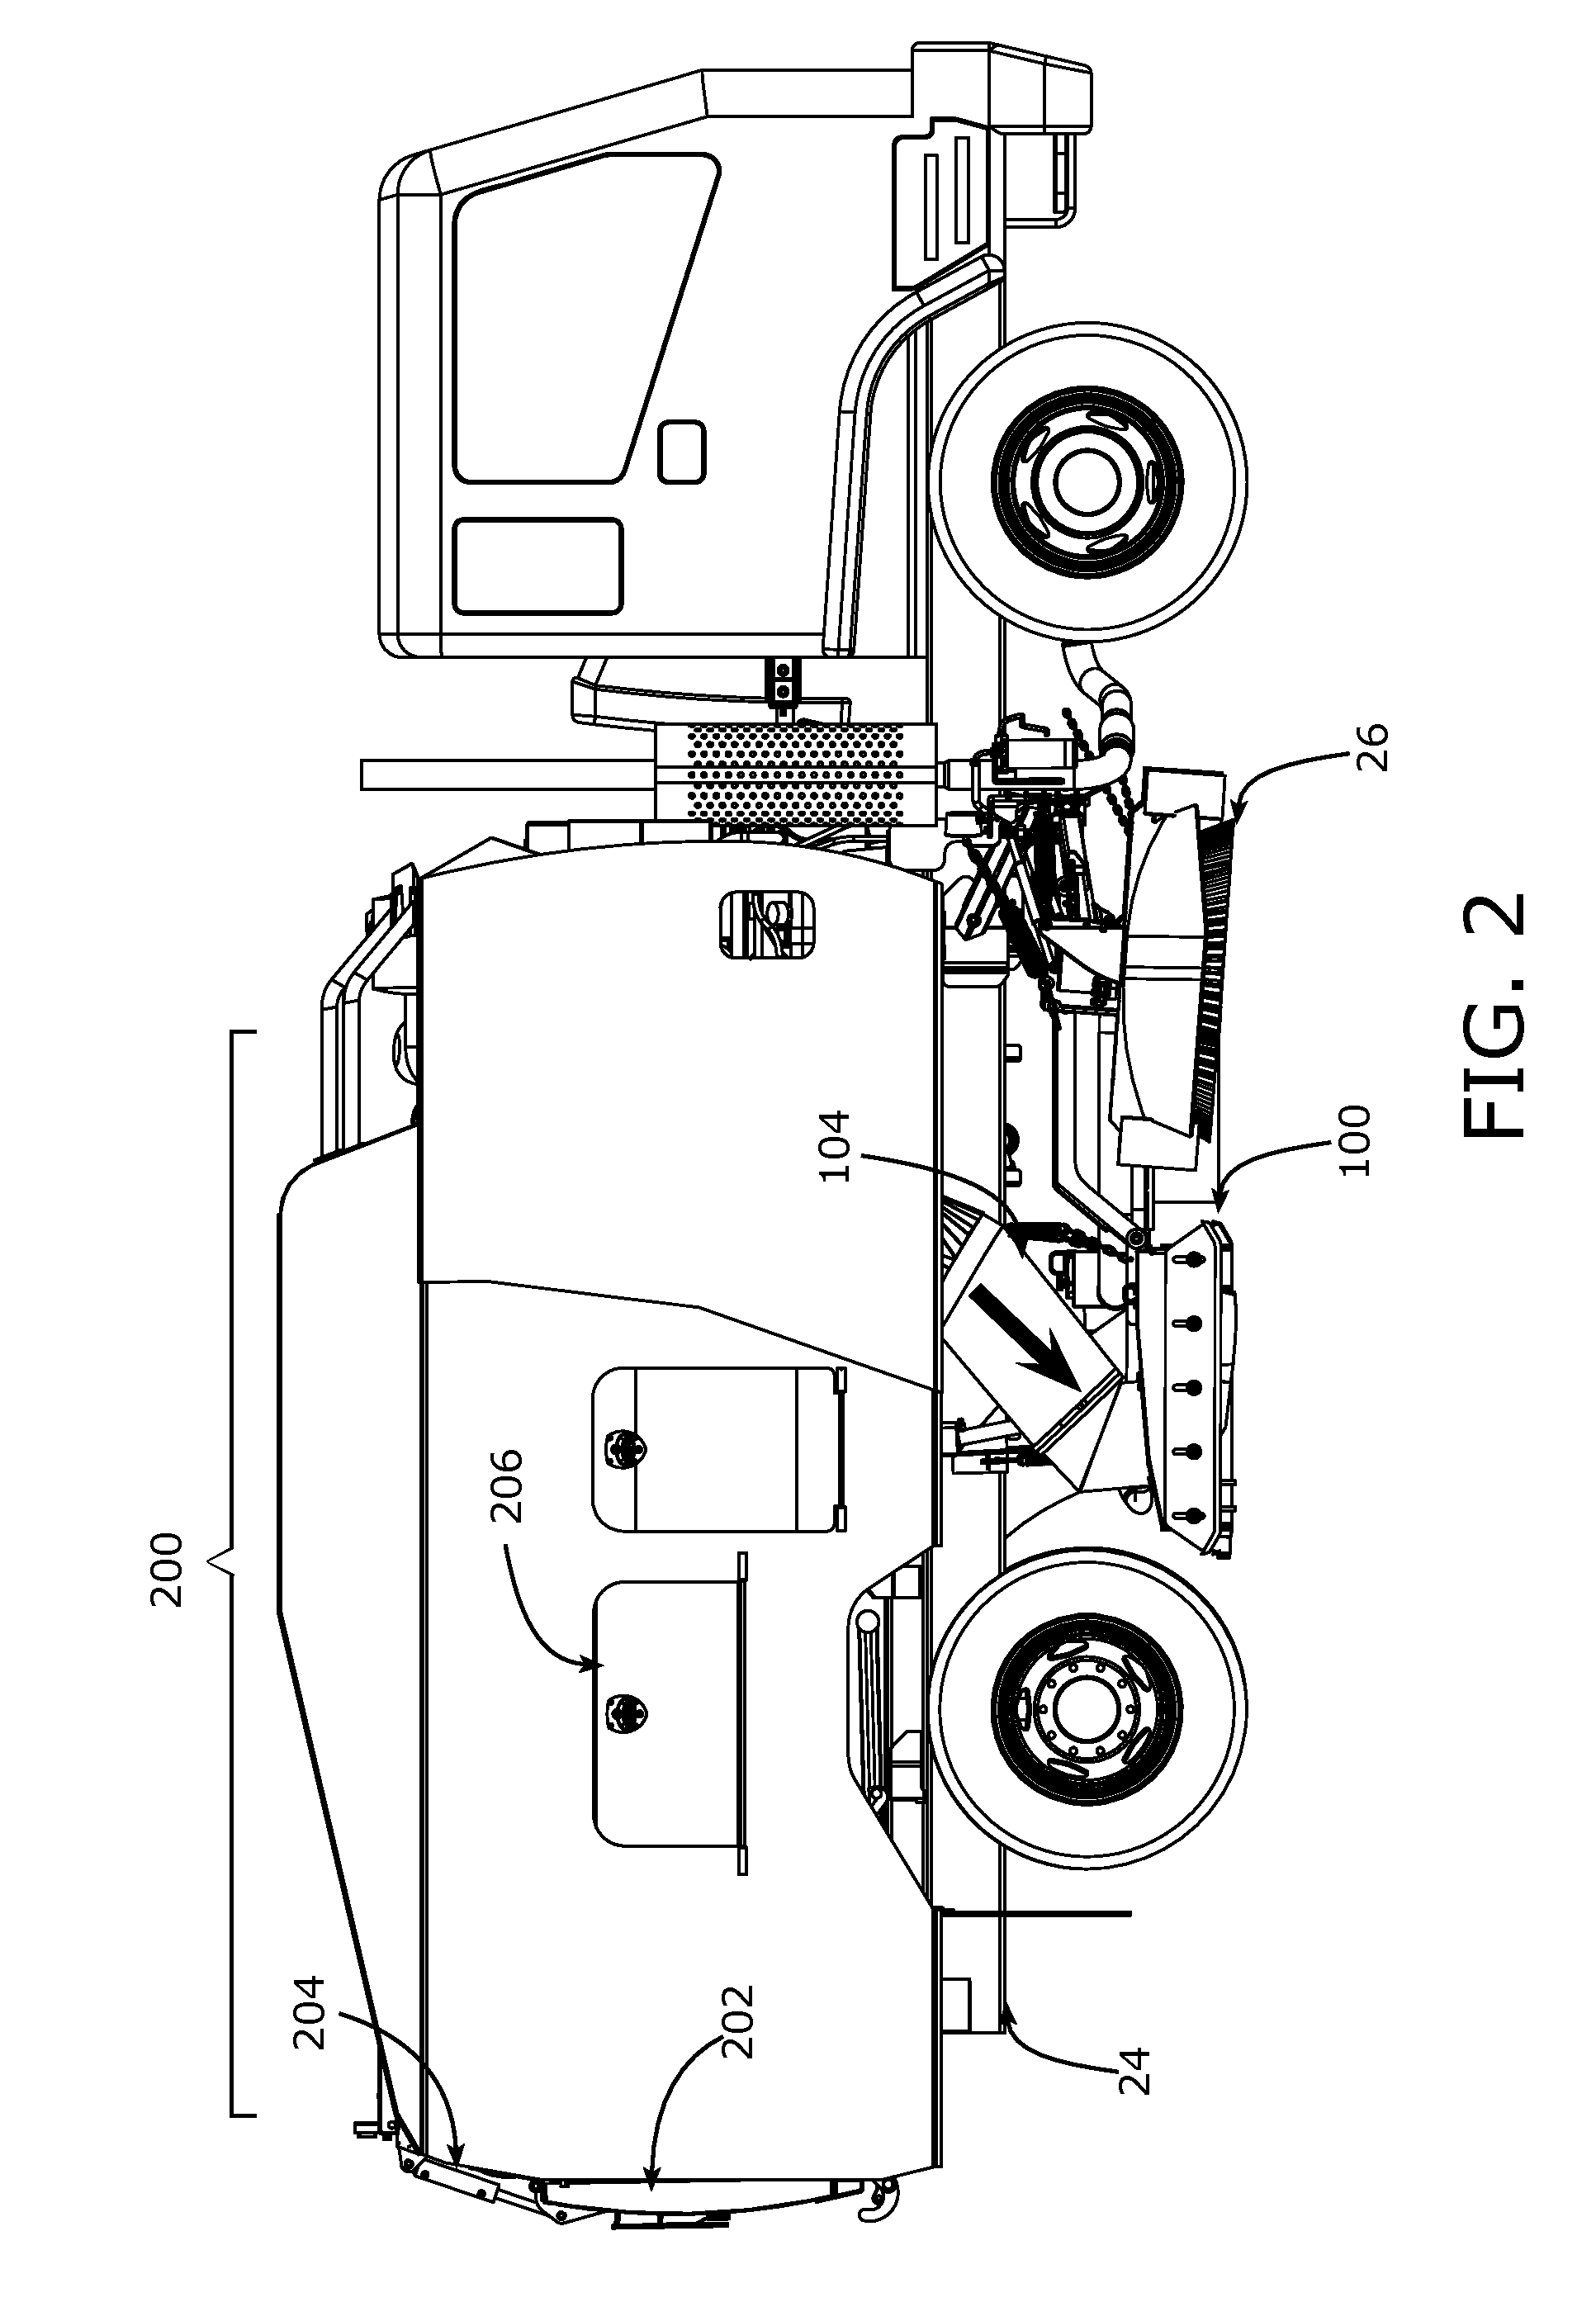 High Efficiency Intake Hood System For Mobile Sweeper Vehicles